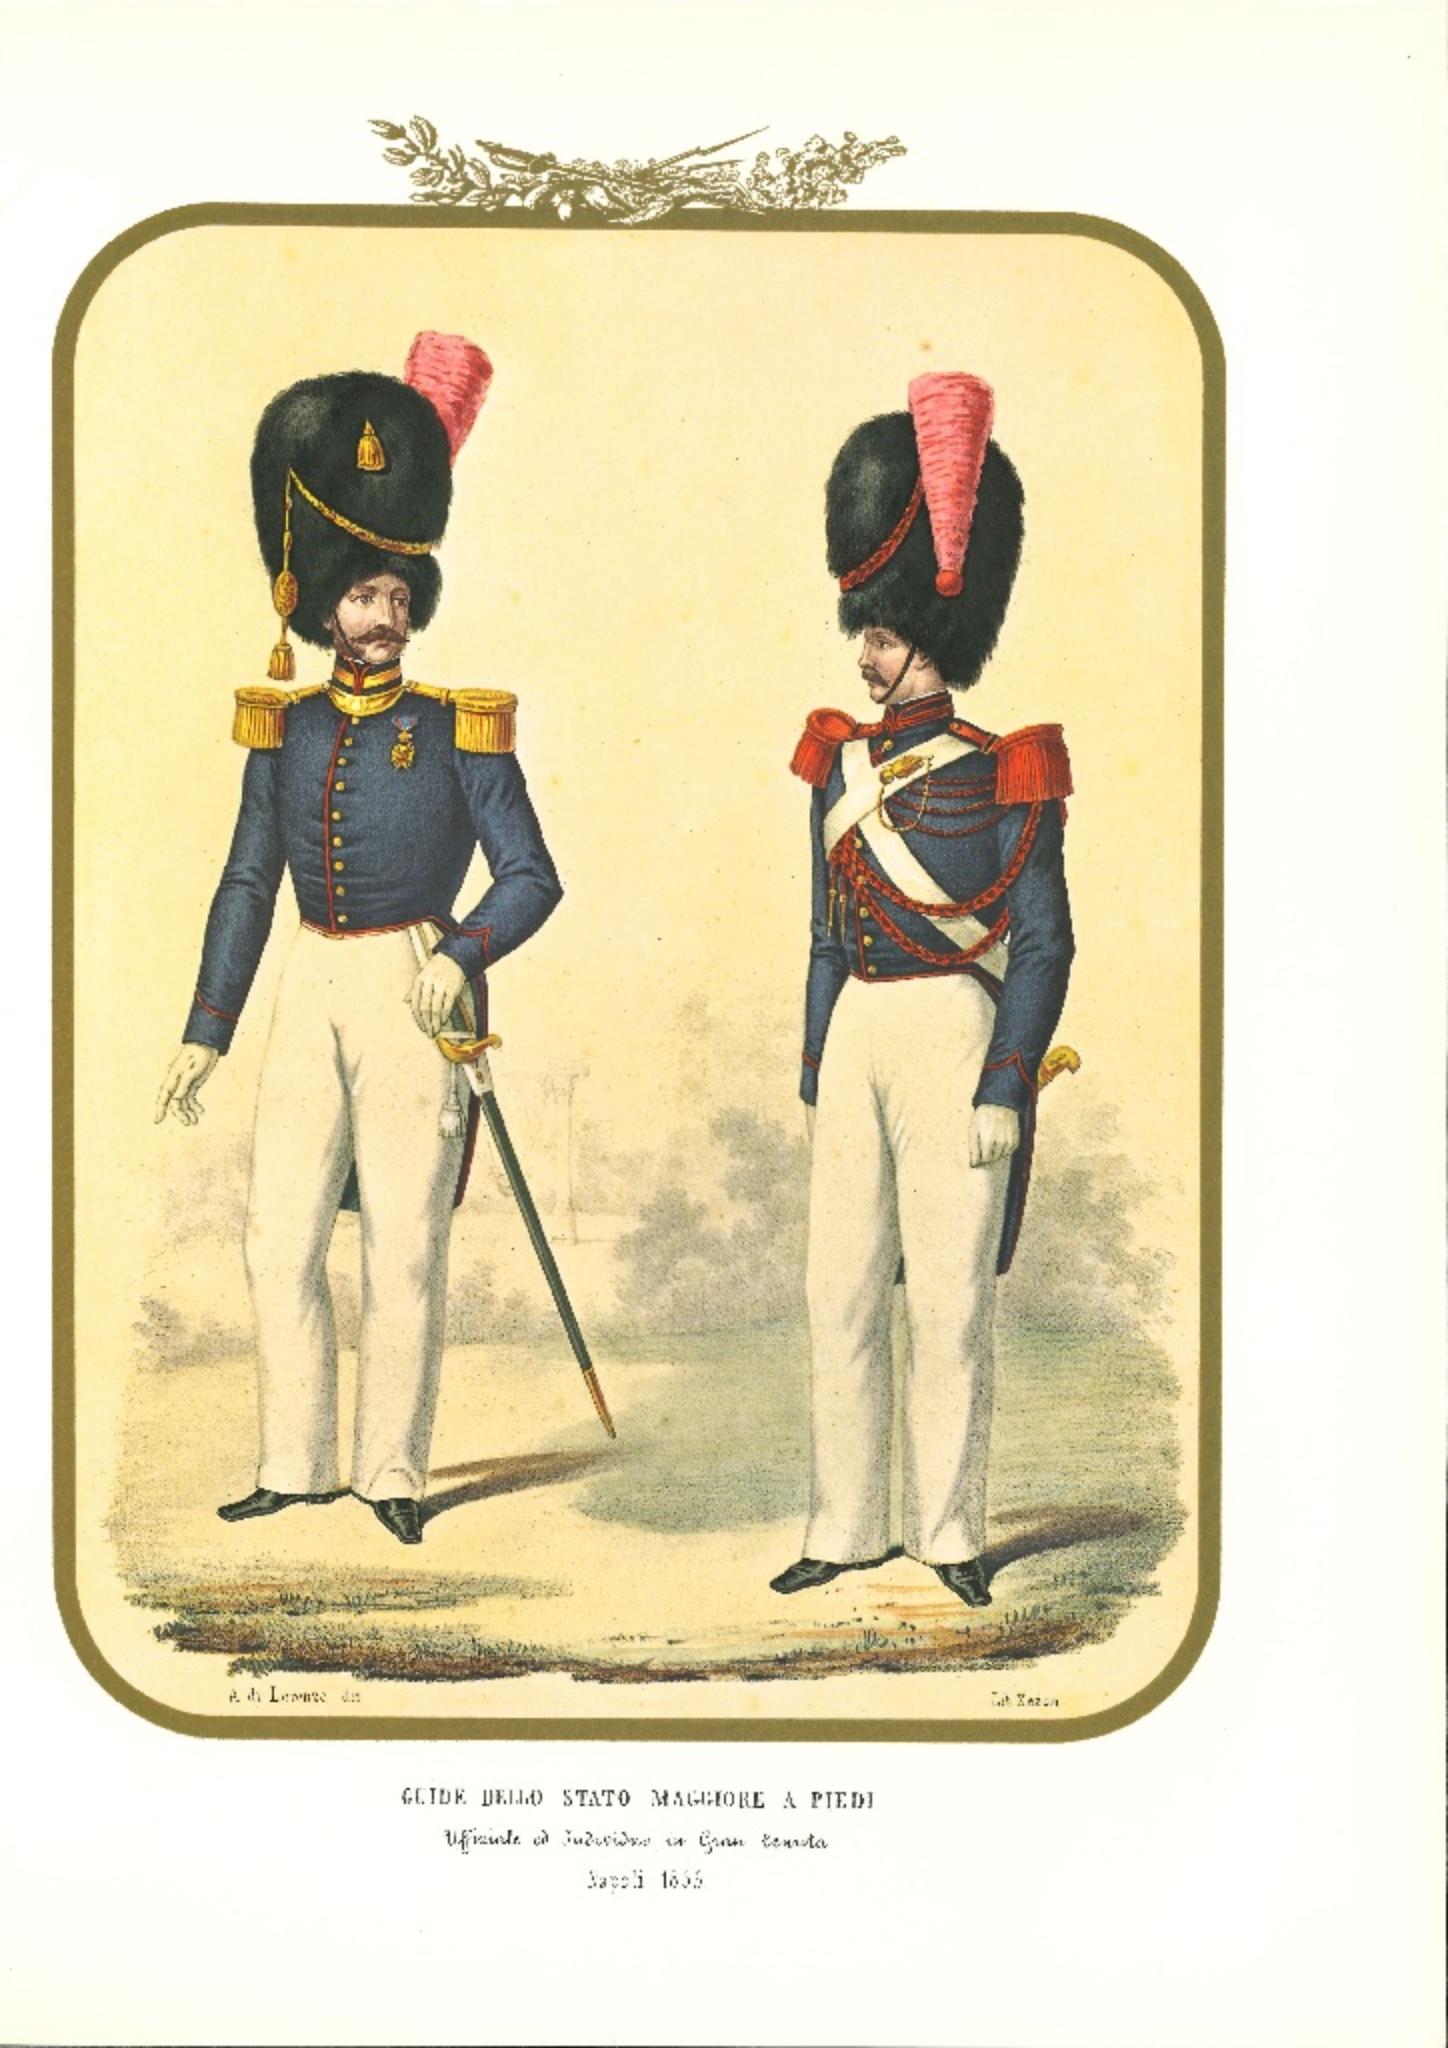 Guides of the General State on foot is a lithograph by Antonio Zezon. Naples,1855.

Interesting colored lithograph which describes the Guides of the General State on foot, Officer and an Individual in great estate.

In excellent condition, this